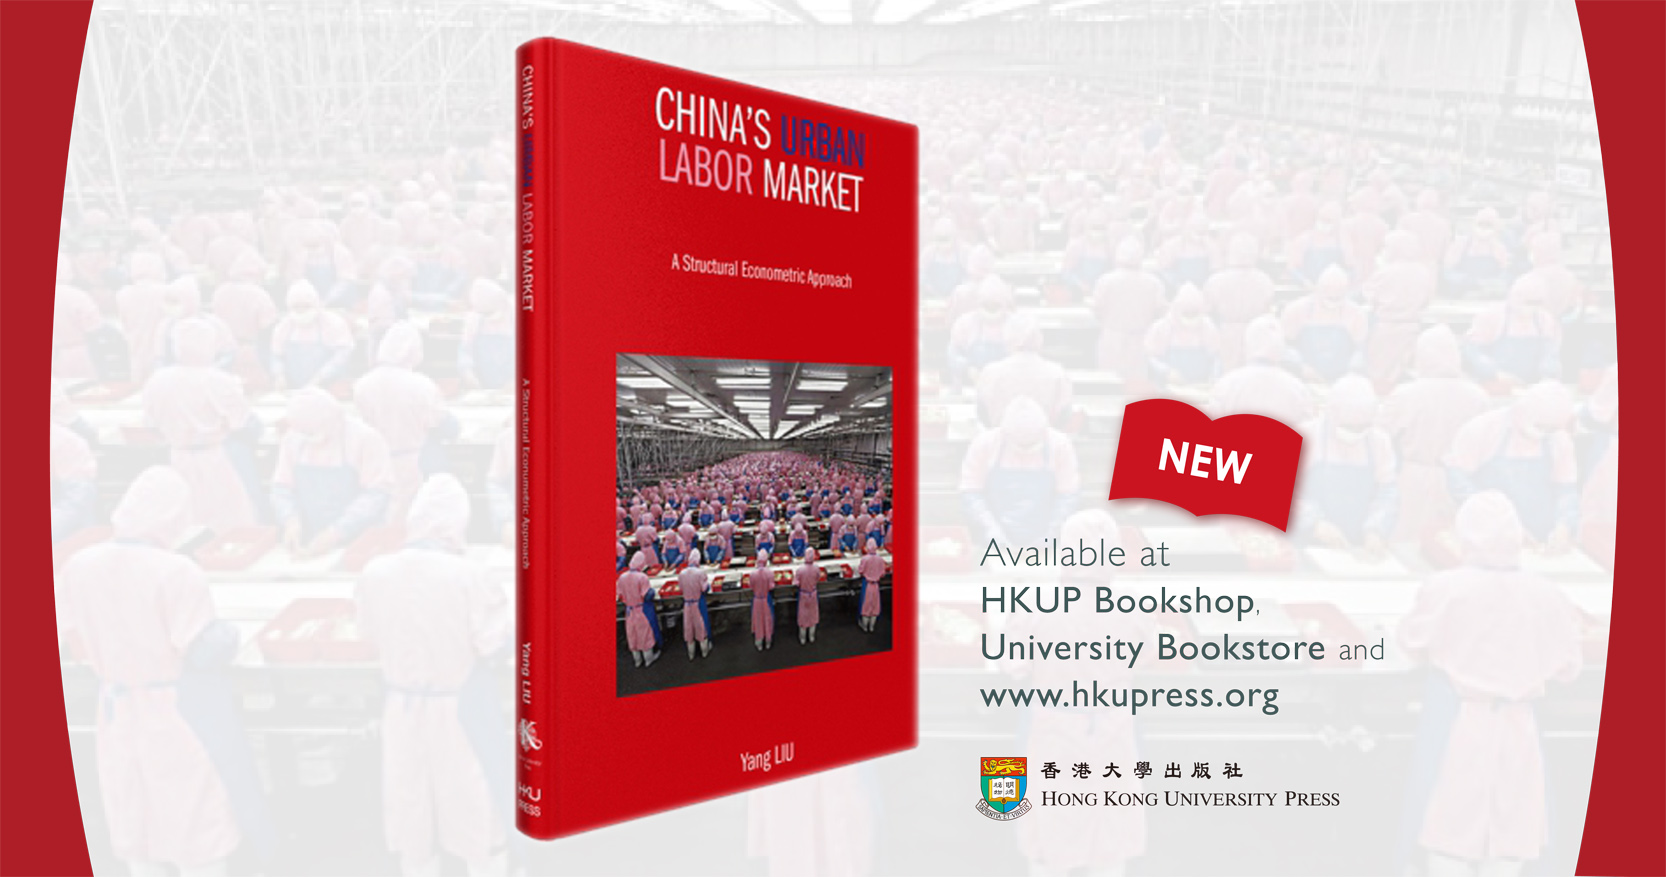 New Book published by HKU Press.